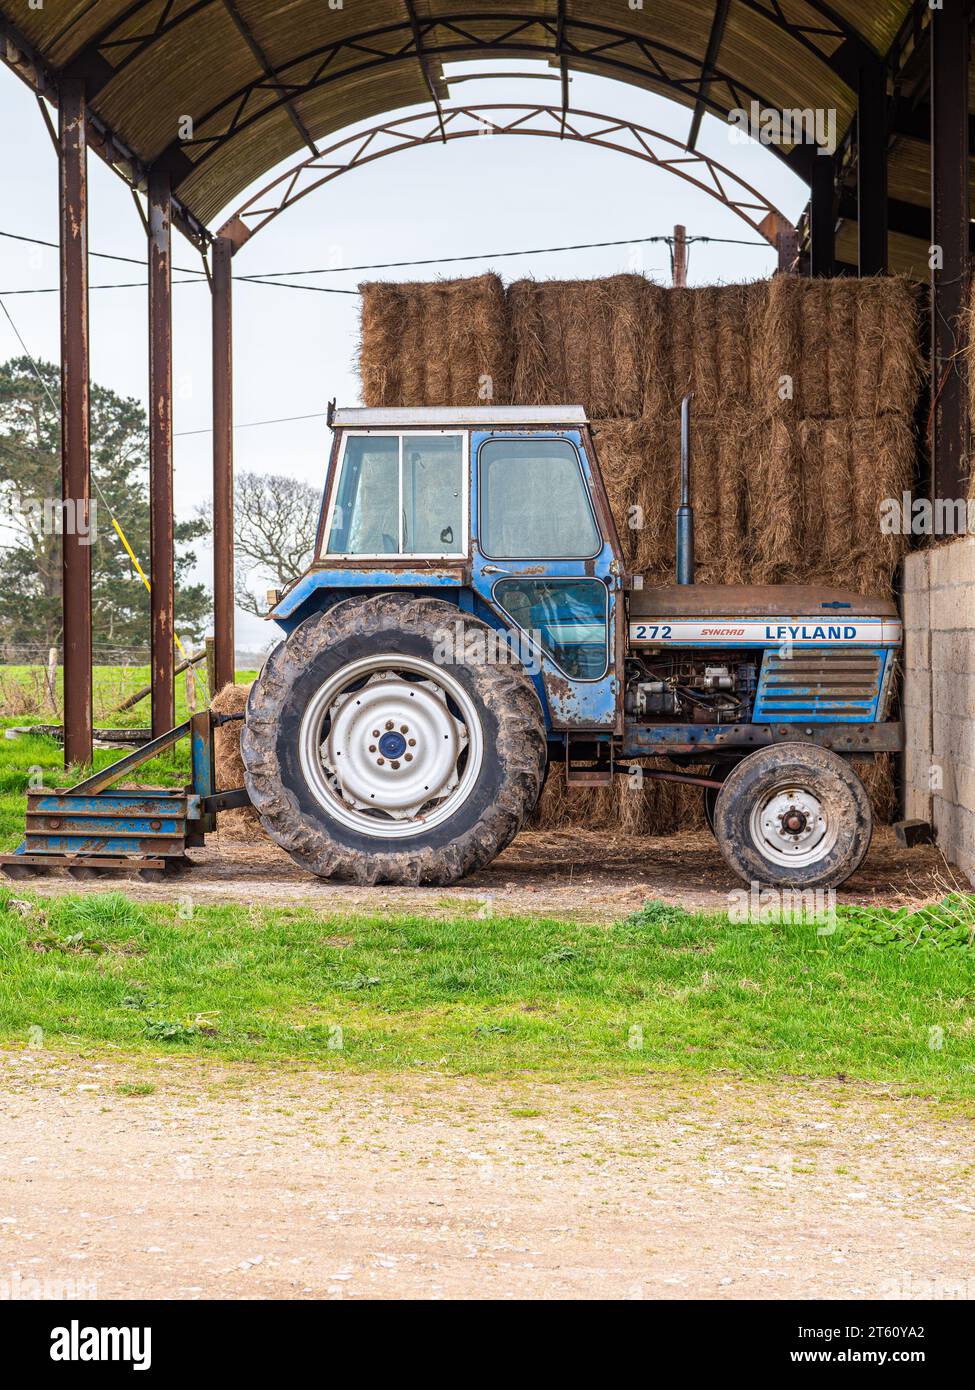 A old vintage leyland 272 tractor in blue, pictured in a open barn Stock Photo